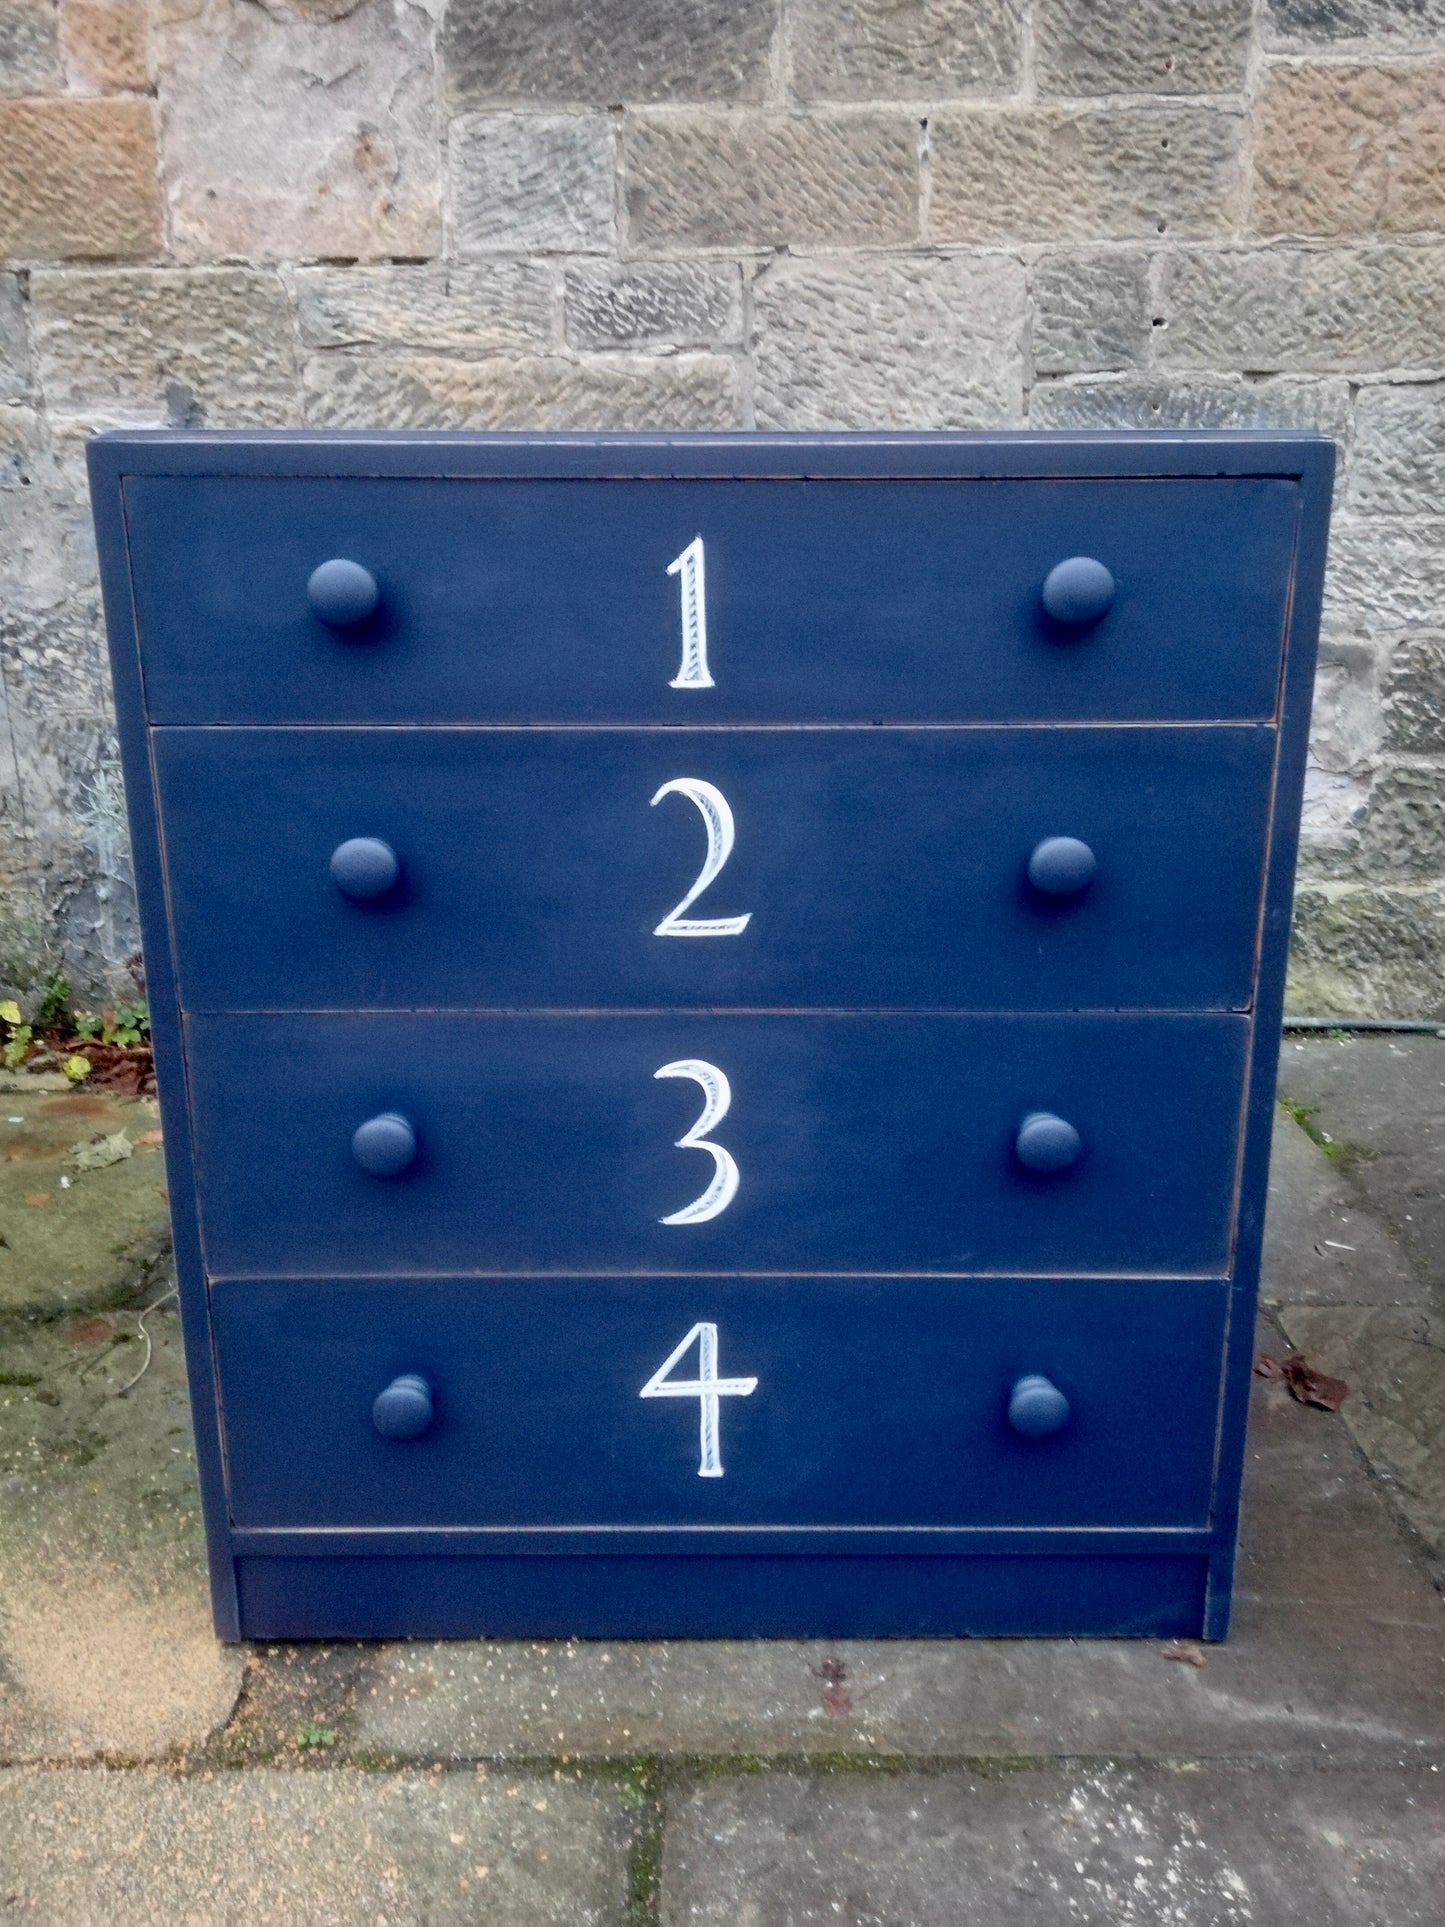 Vintage chest of drawers painted in navy